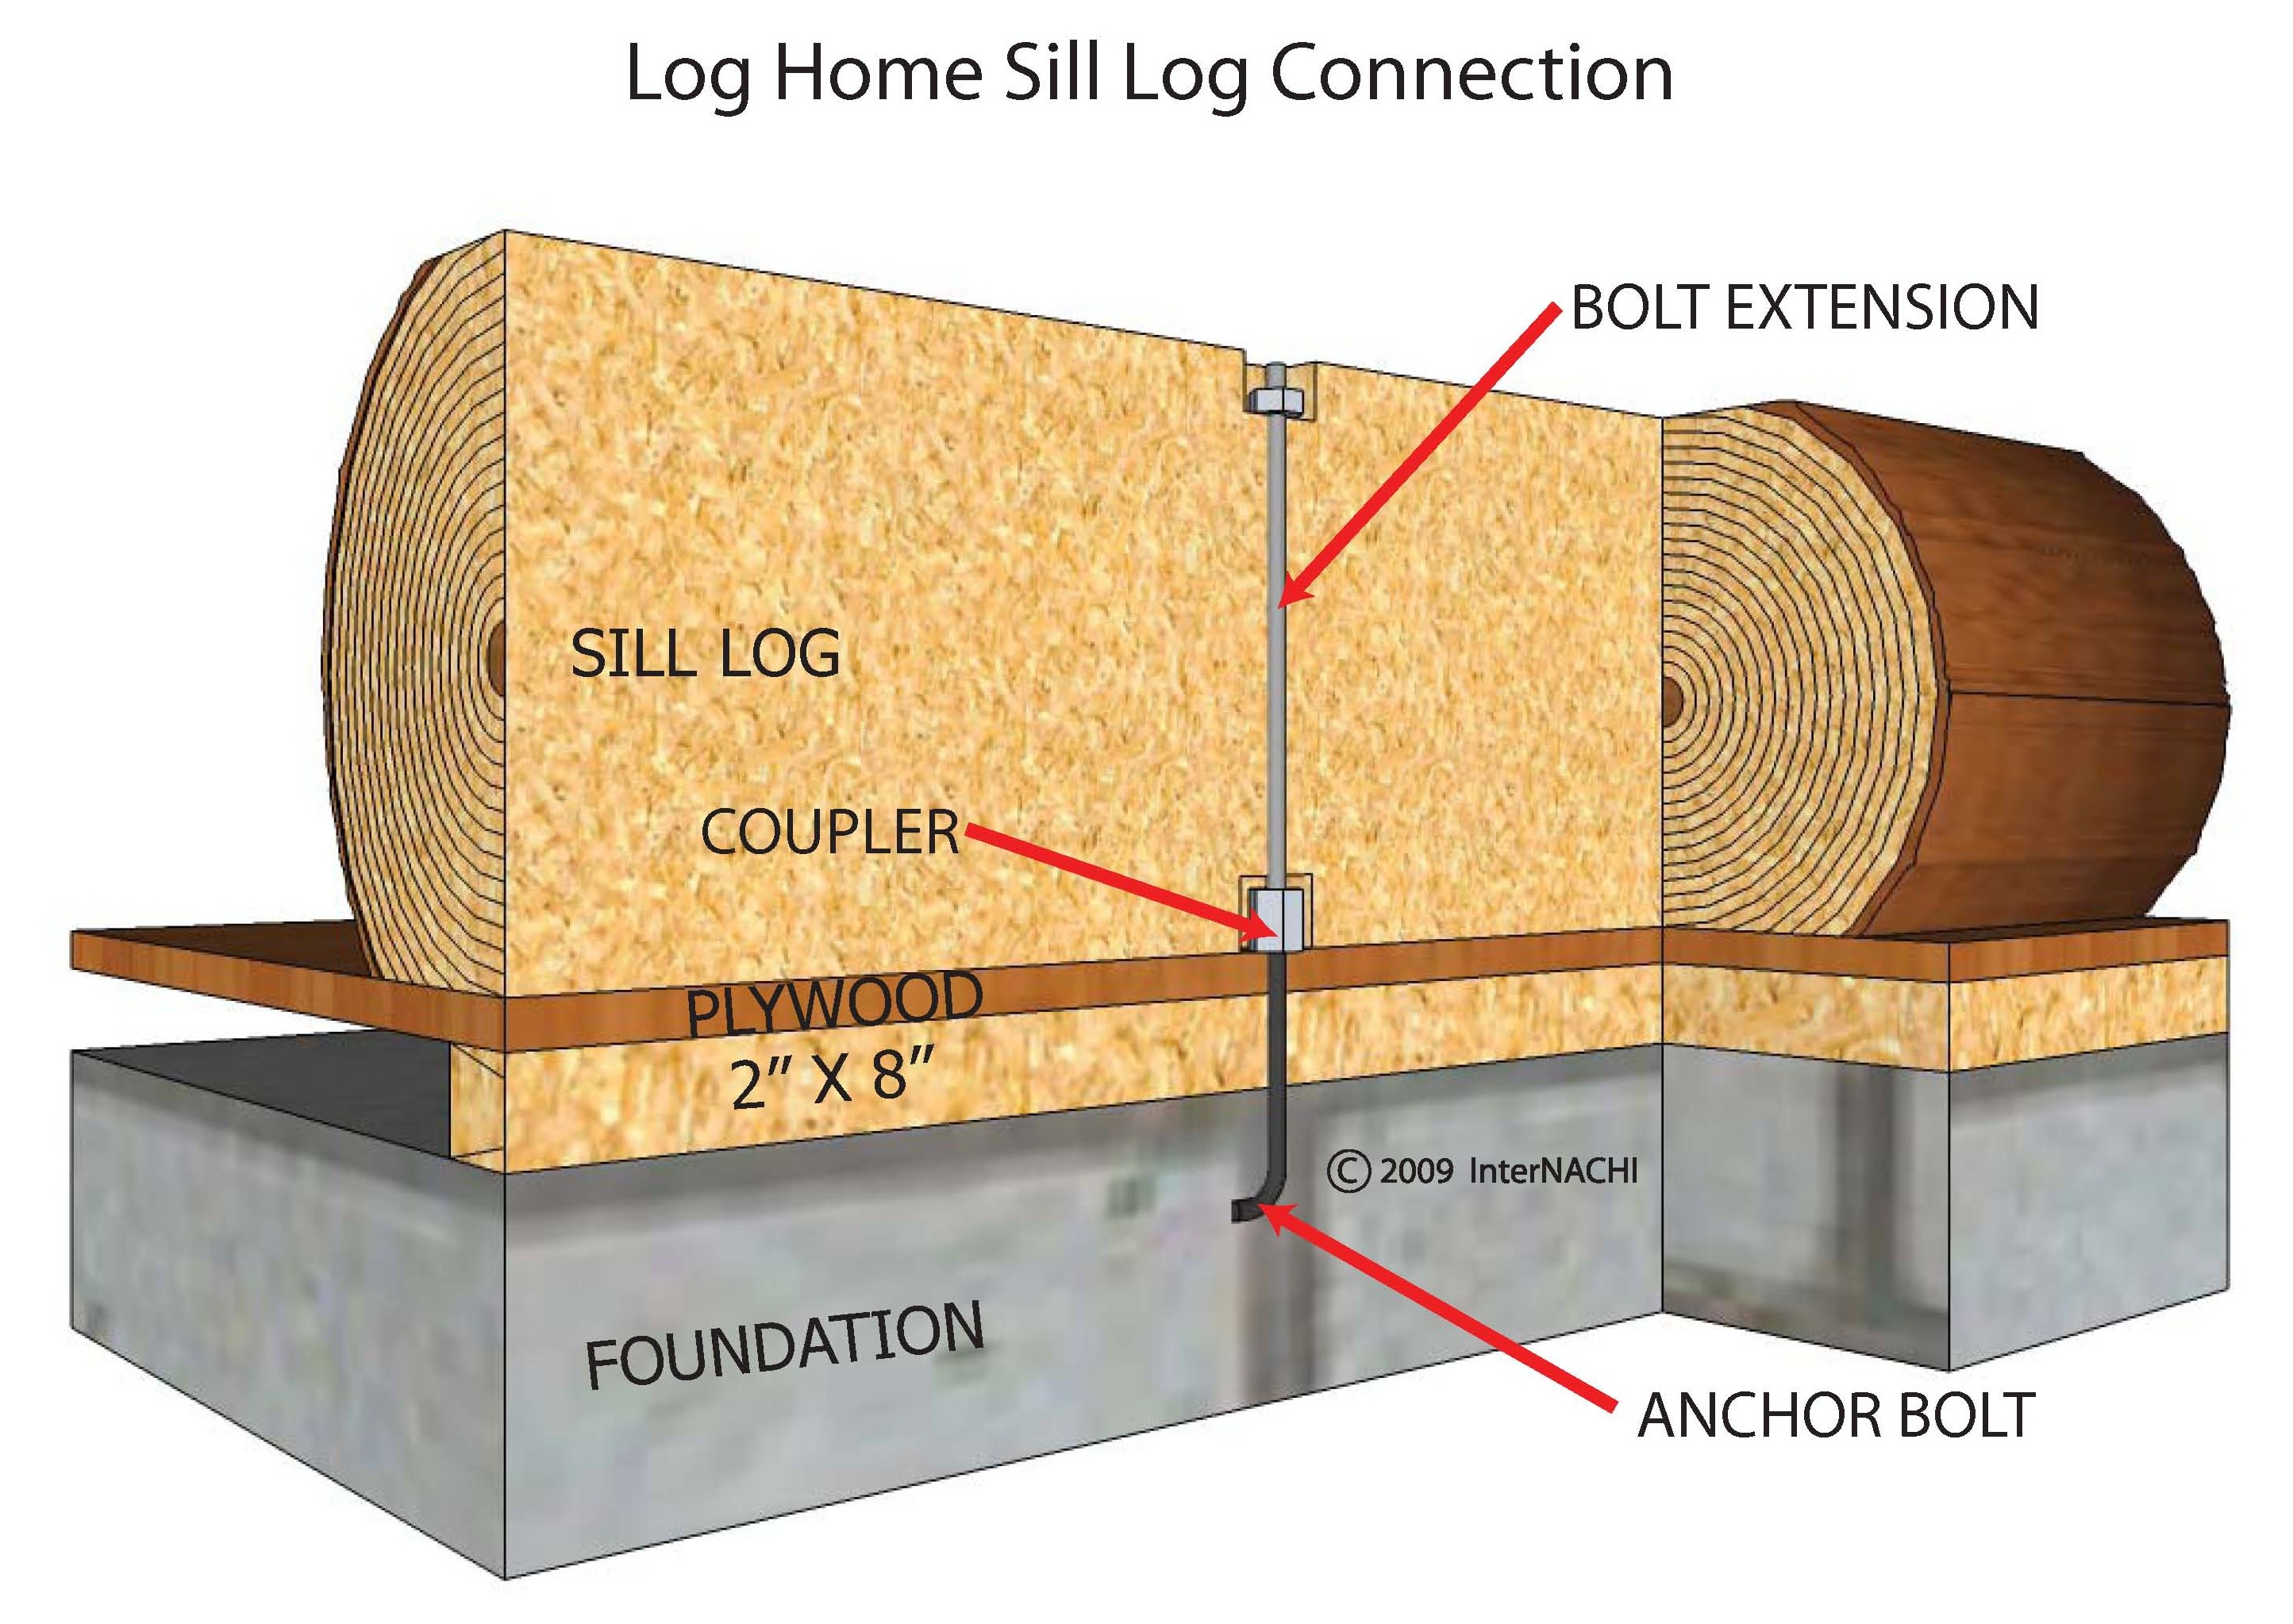 Log home sill log connection.